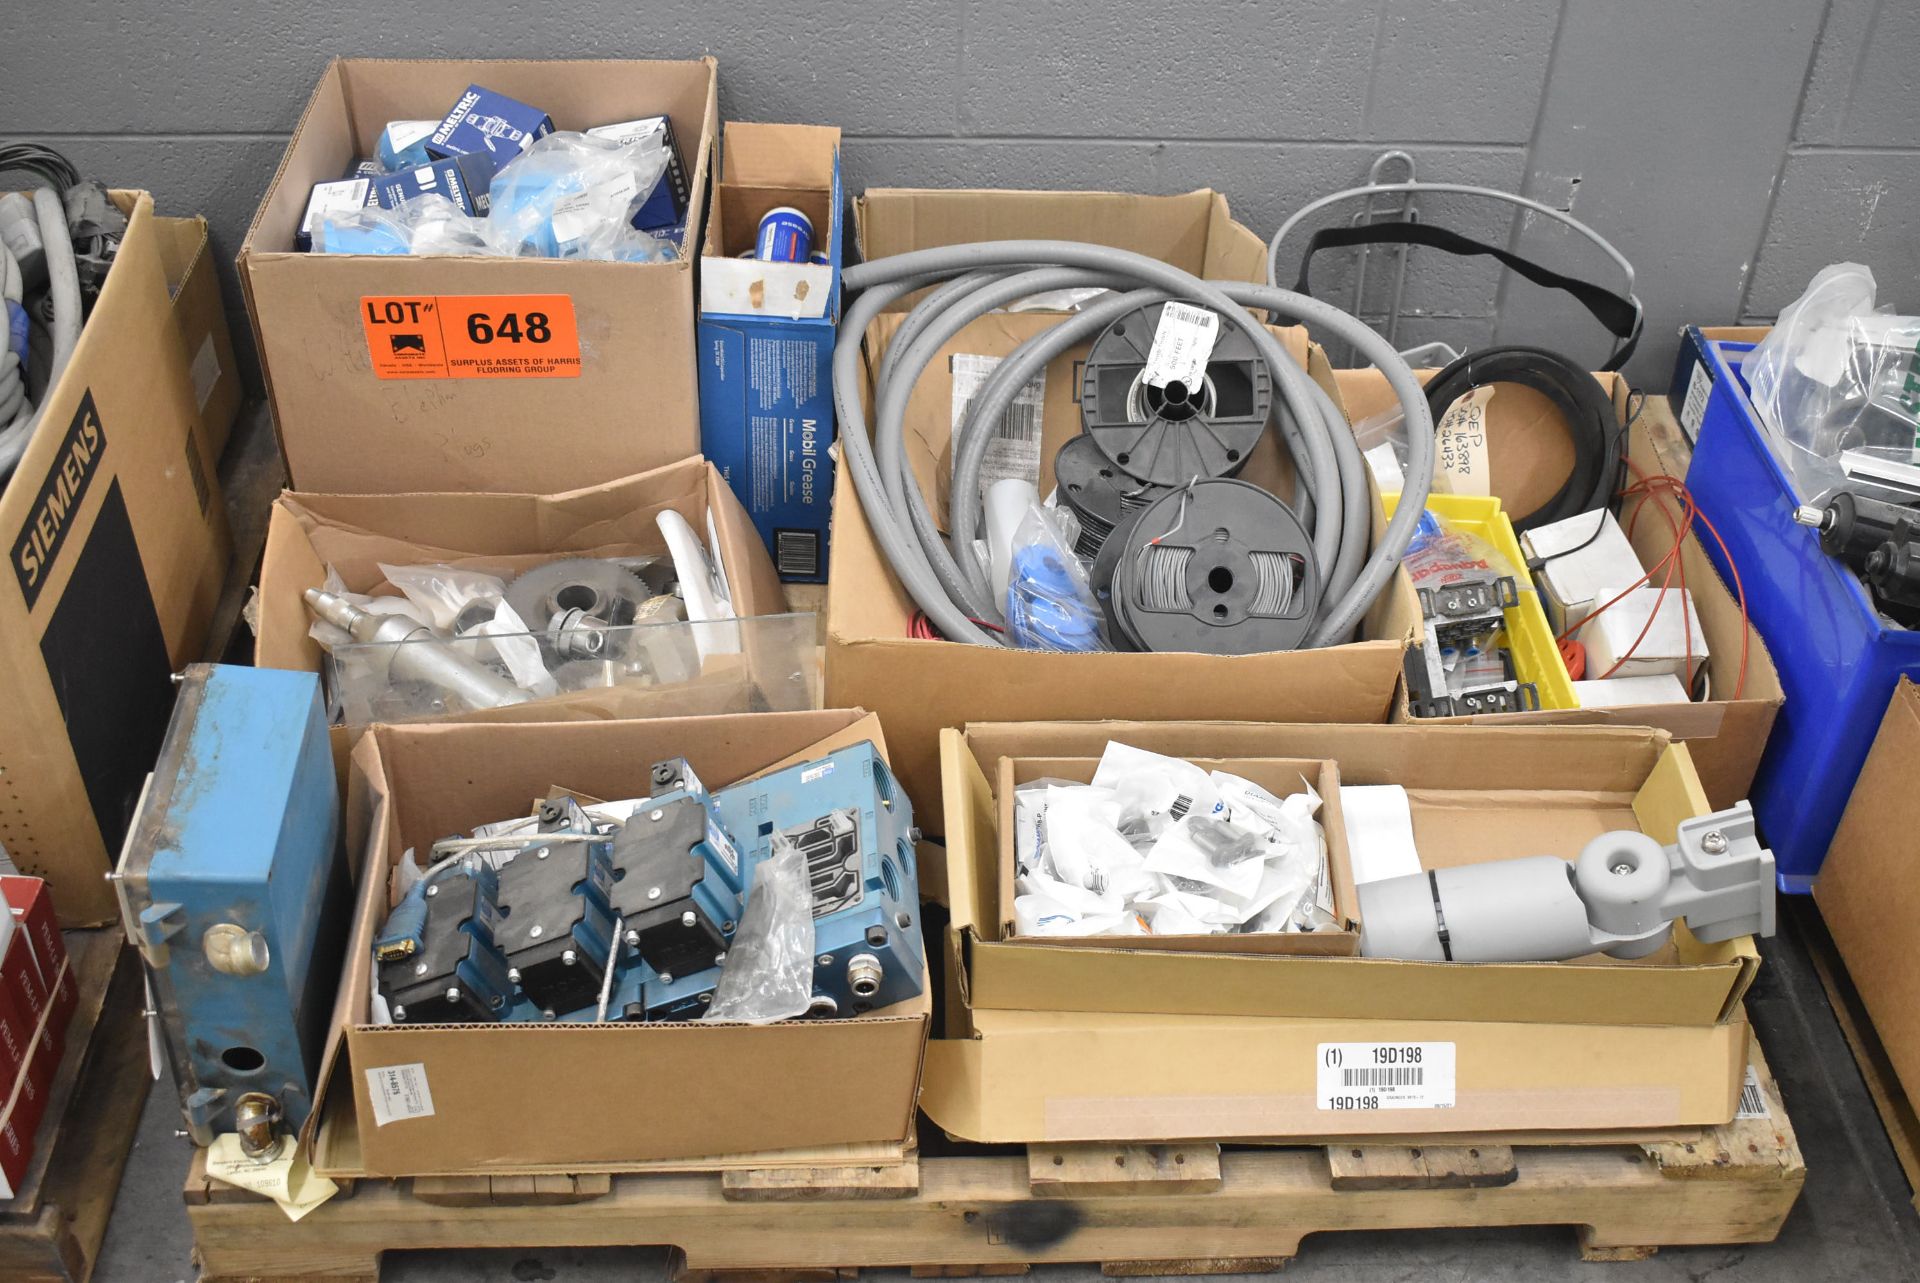 LOT/ SKID WITH CONTENTS - INCLUDING AUTOMATION COMPONENTS, SPARE PARTS, SHOP SUPPLIES, ELECTRICAL